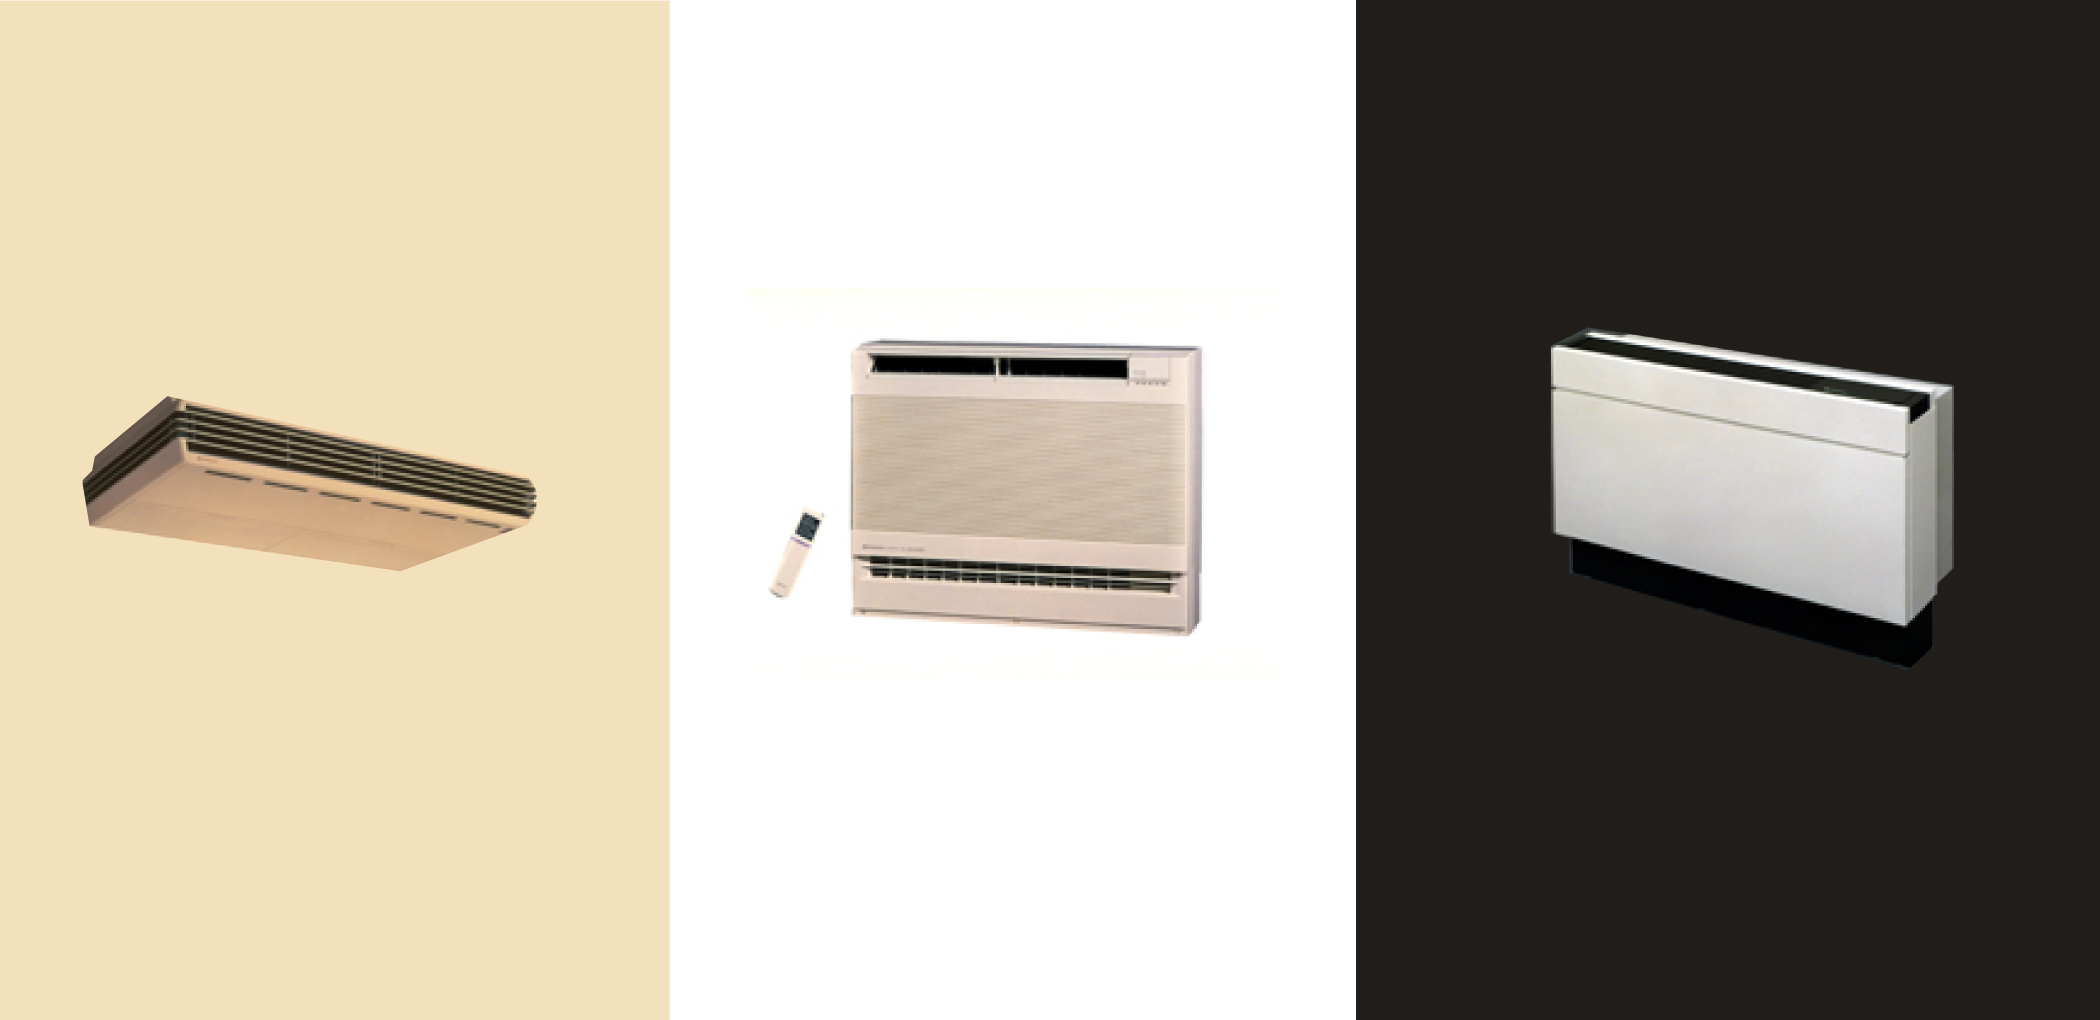 evolution of packaged air conditioners